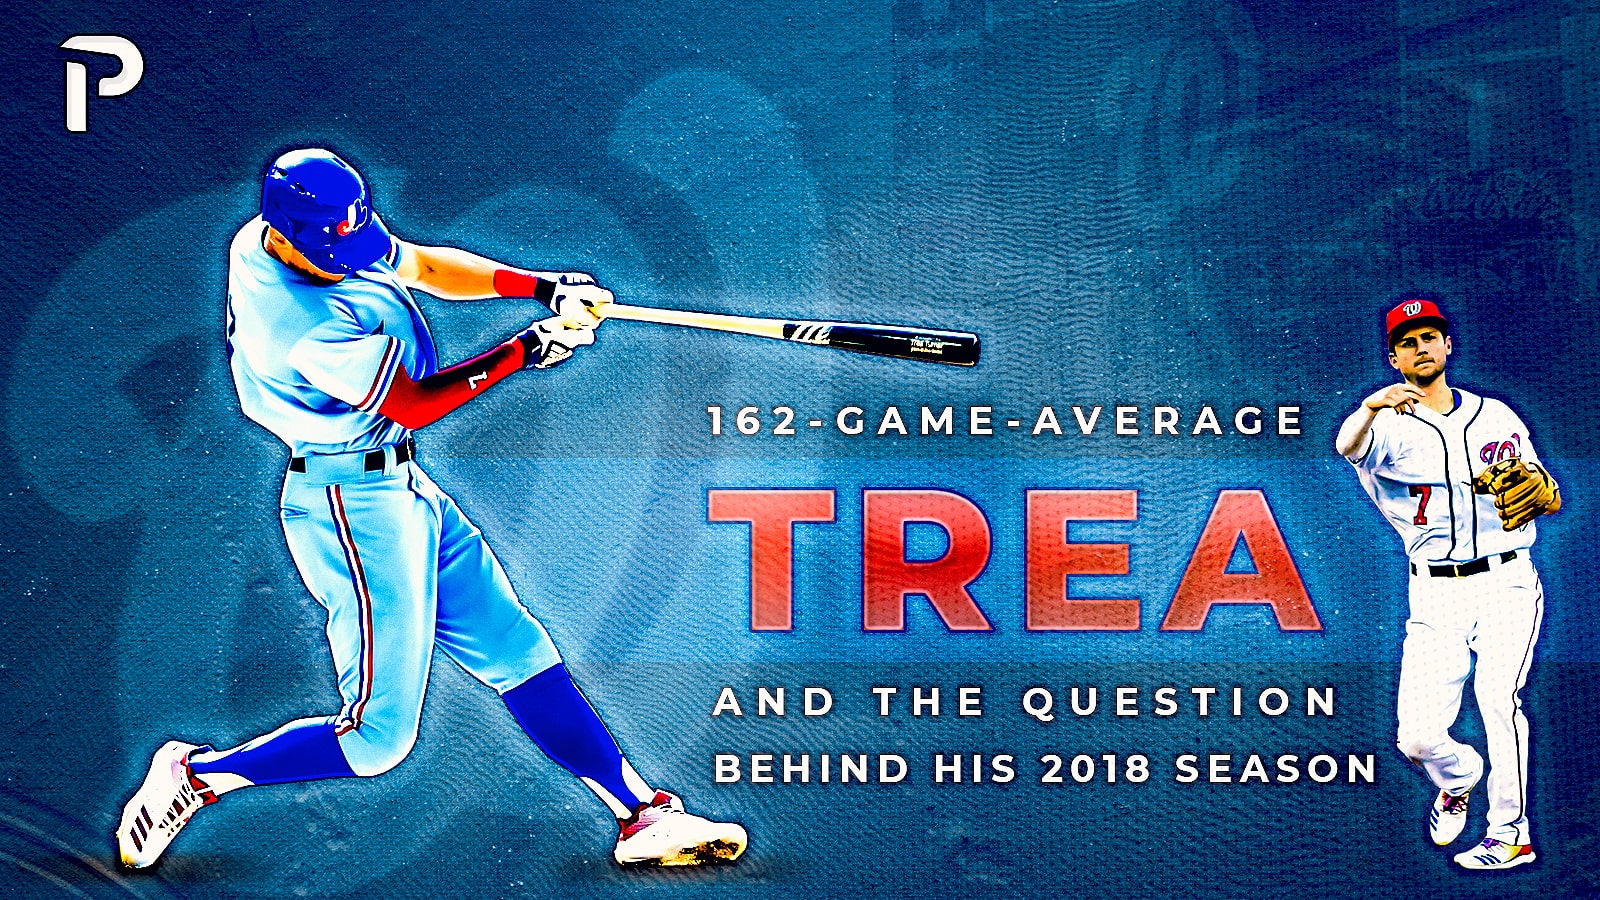 162-Game-Trea And The Question Behind His 2018 Season